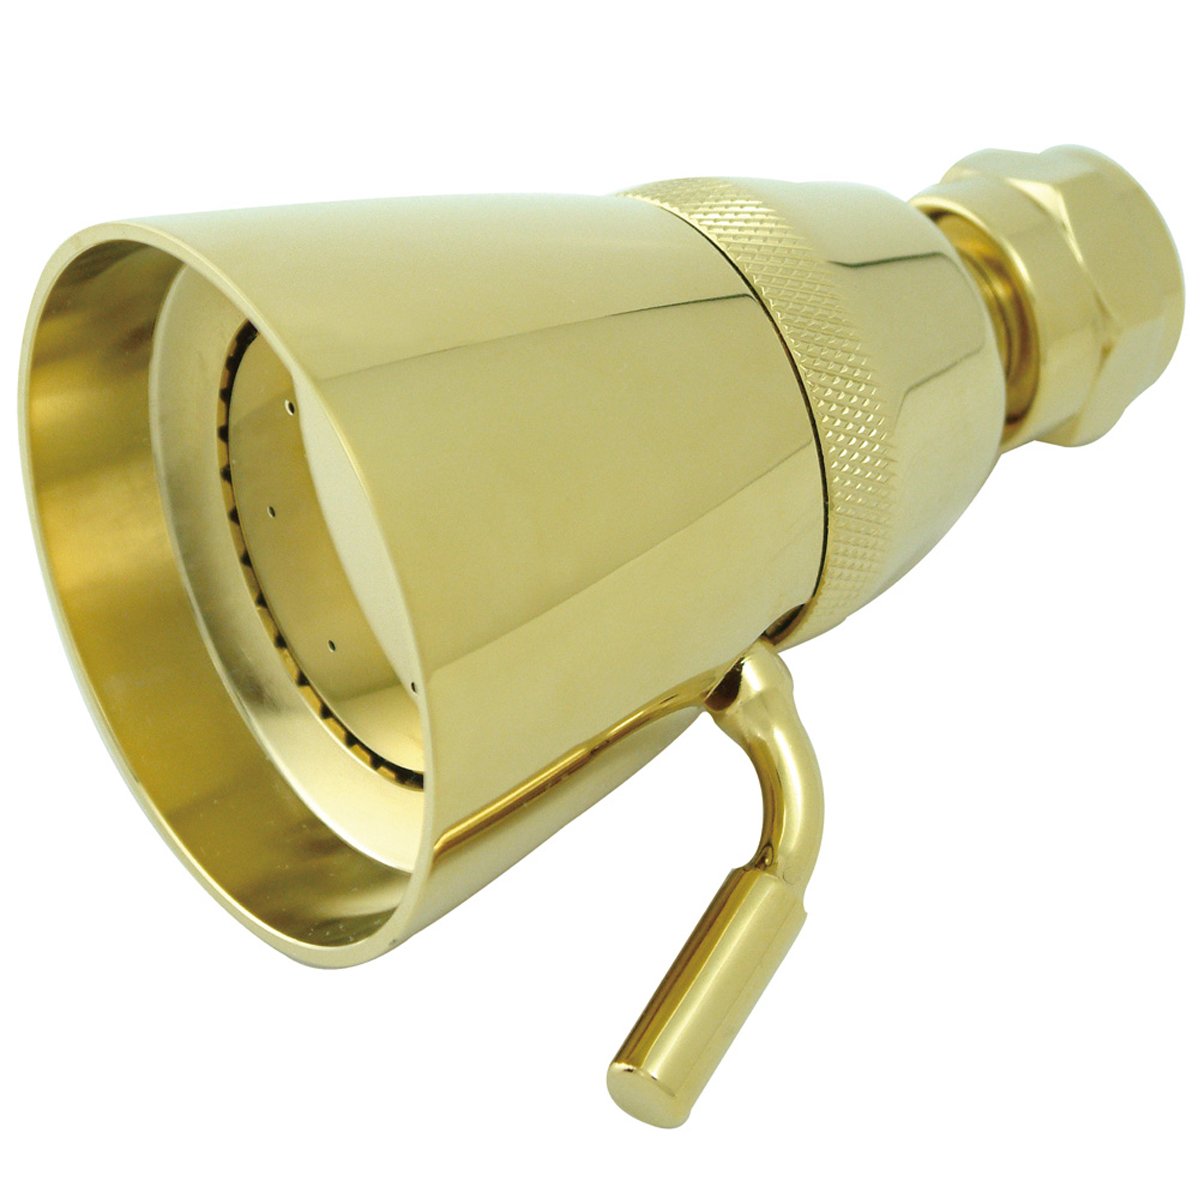 Kingston Brass Made to Match 2-1/4" Shower Head-Shower Faucets-Free Shipping-Directsinks.